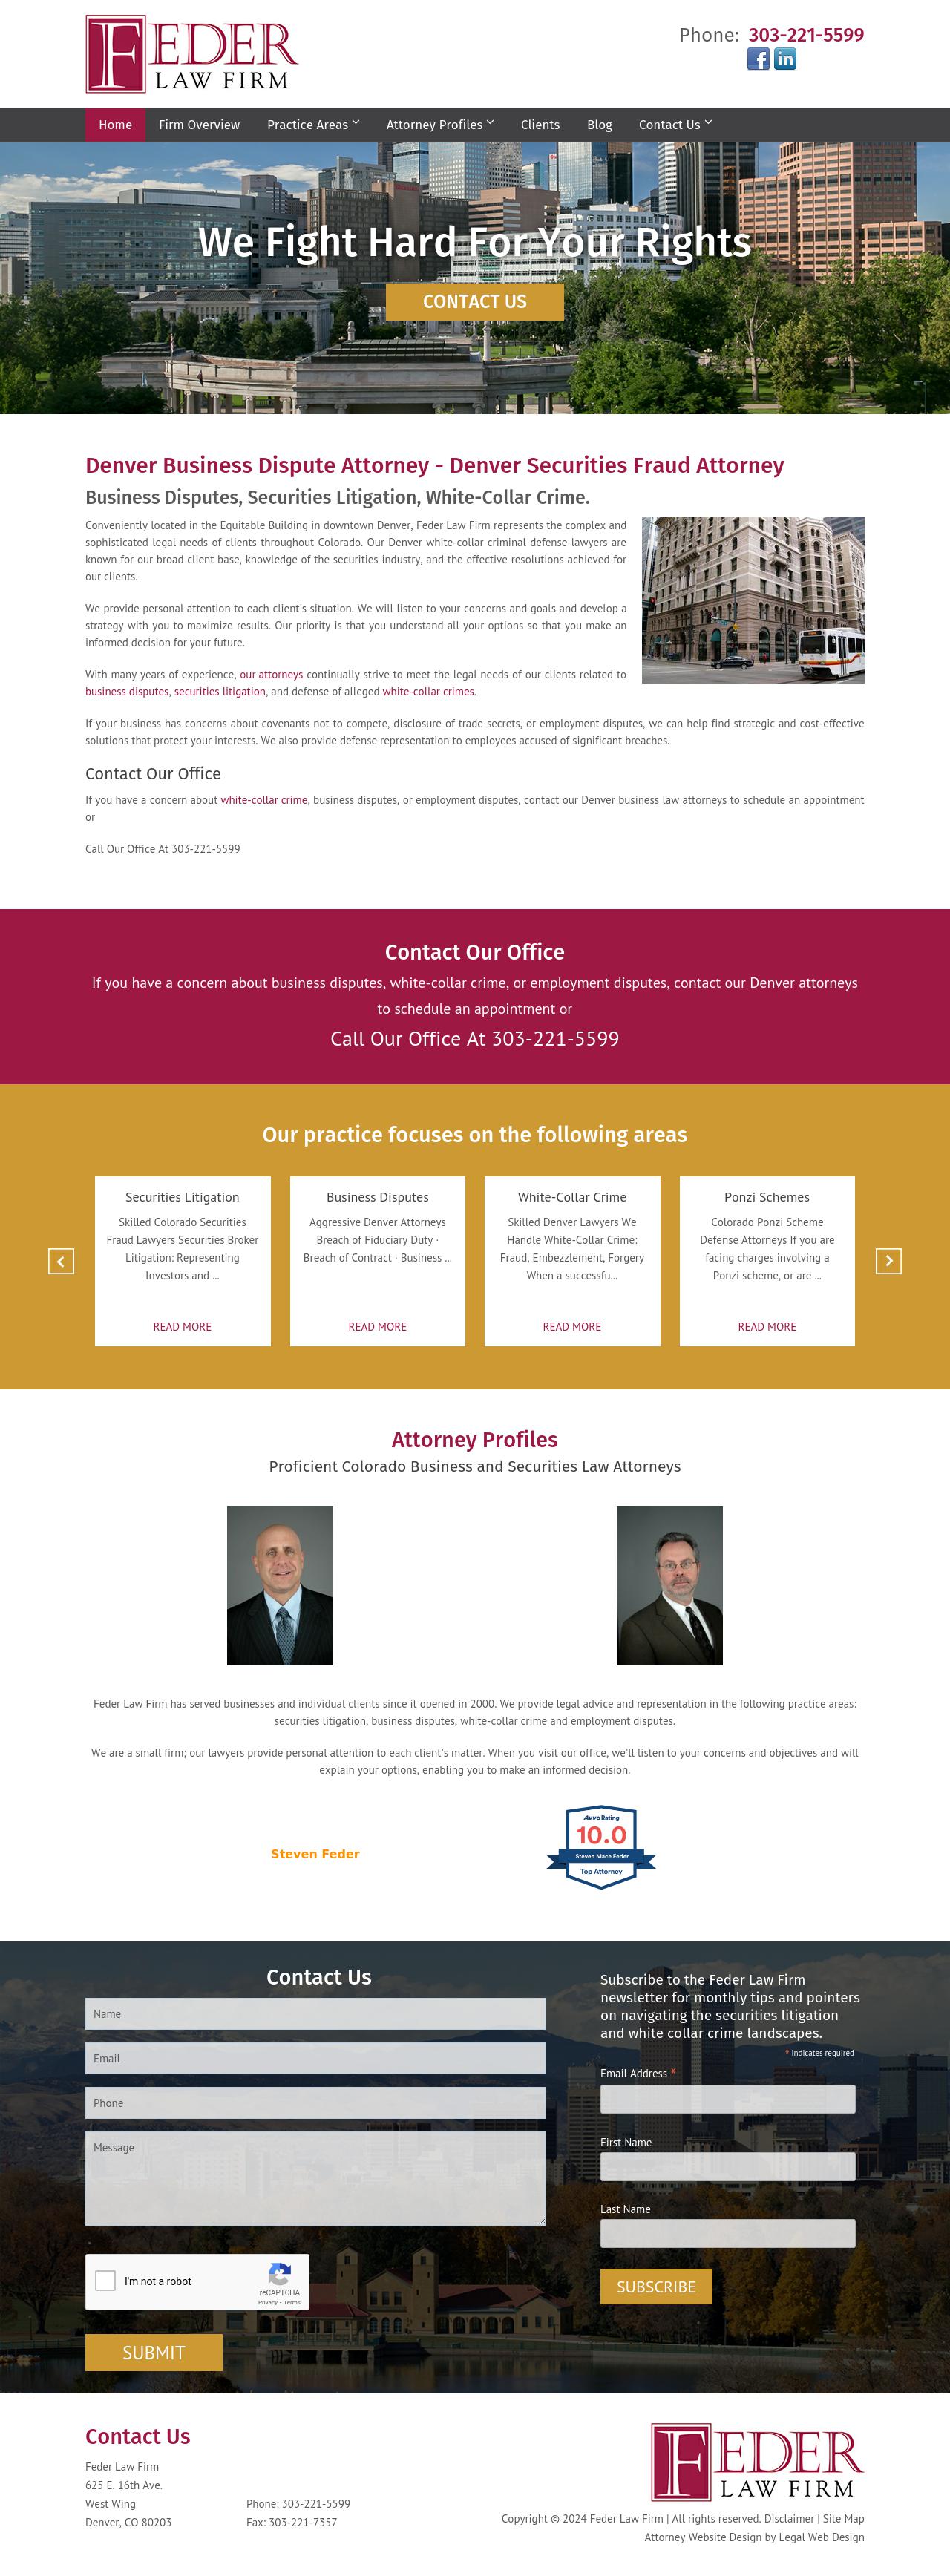 Feder Law Firm - Denver CO Lawyers